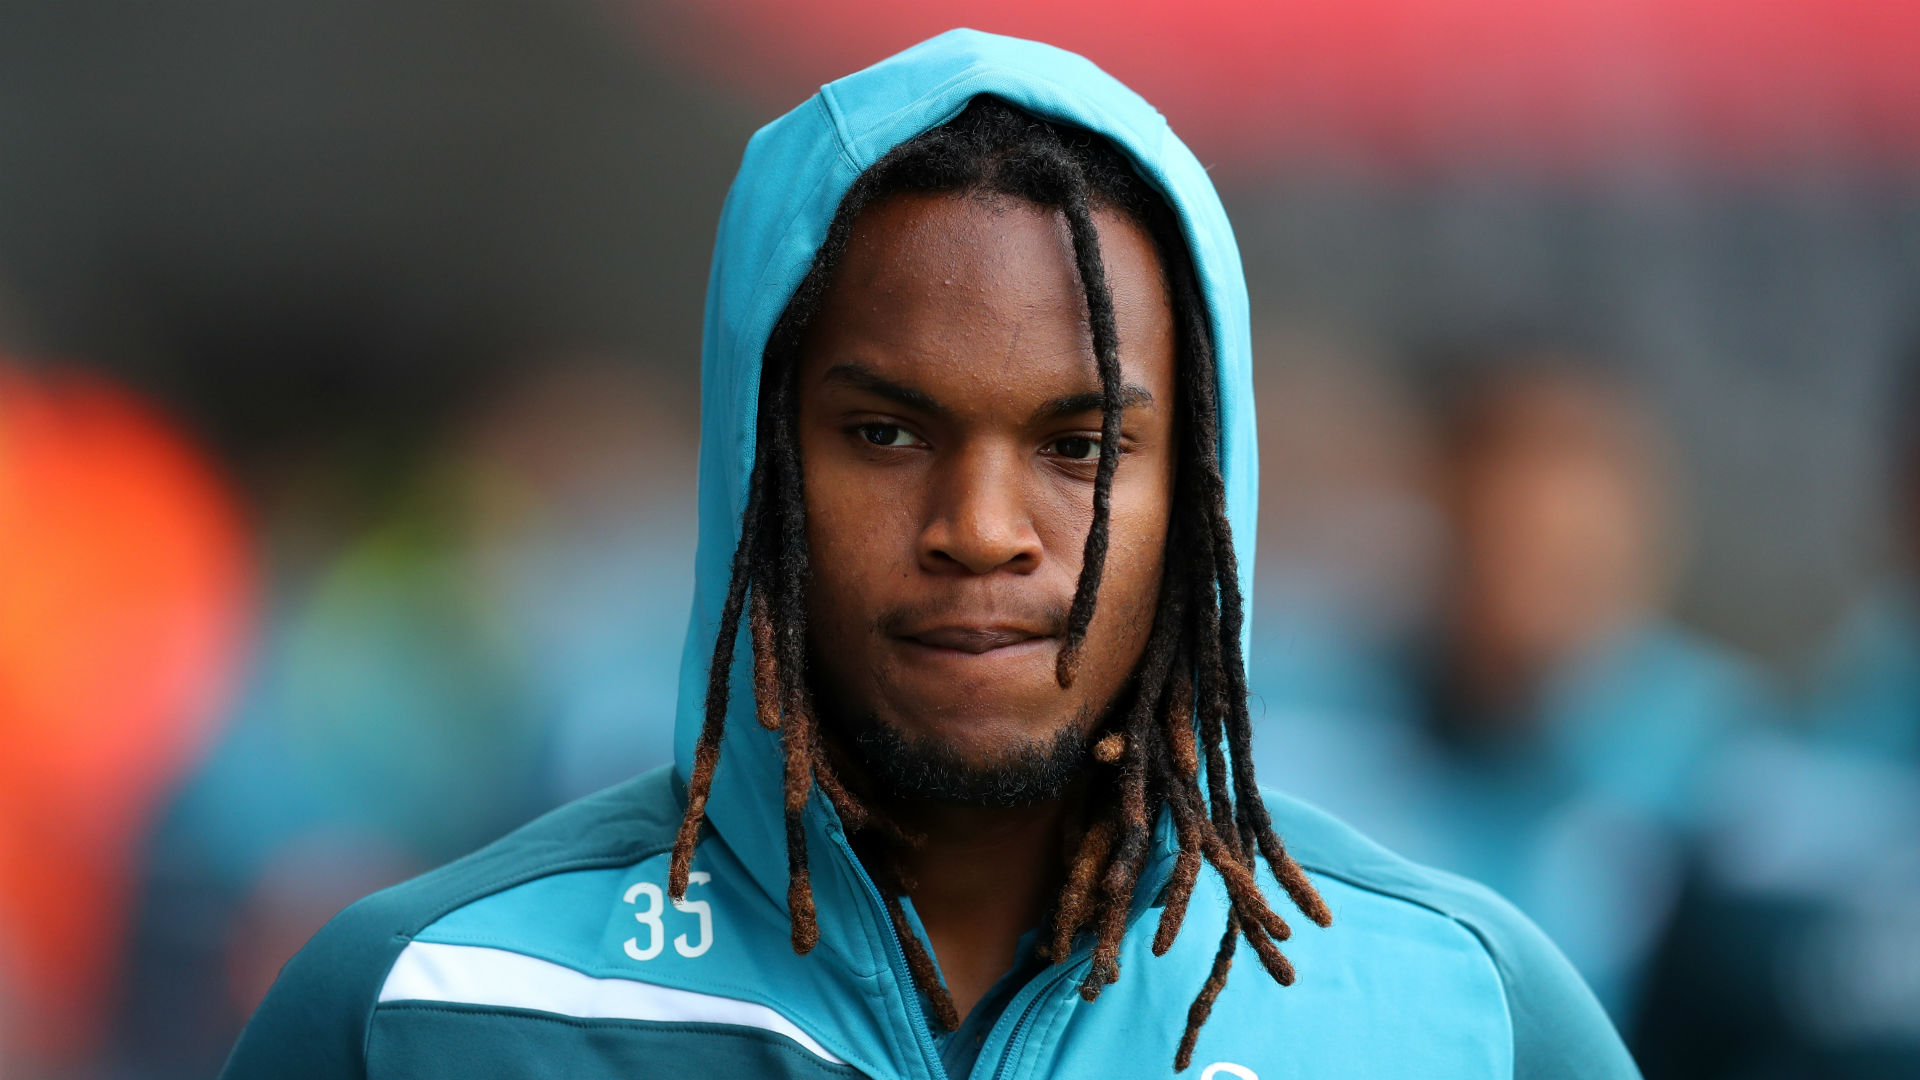 Bayern Munich had apparently twice refused to let Renato Sanches leave, but he has now signed for Lille on a permanent deal.